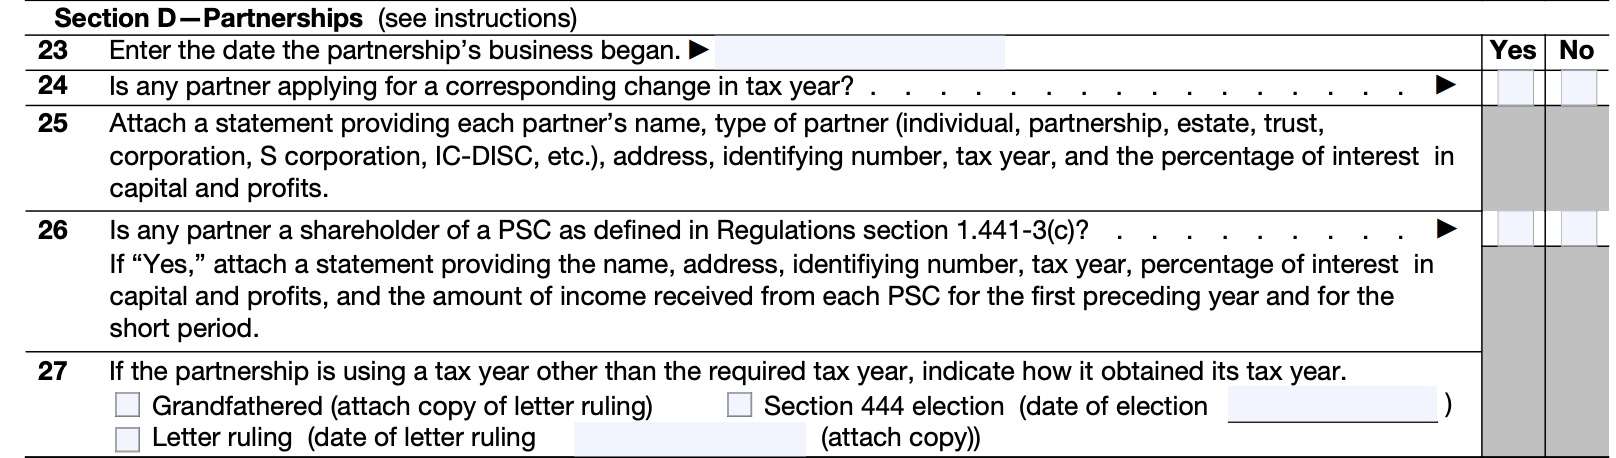 irs form 1128, part iii, section d, partnerships